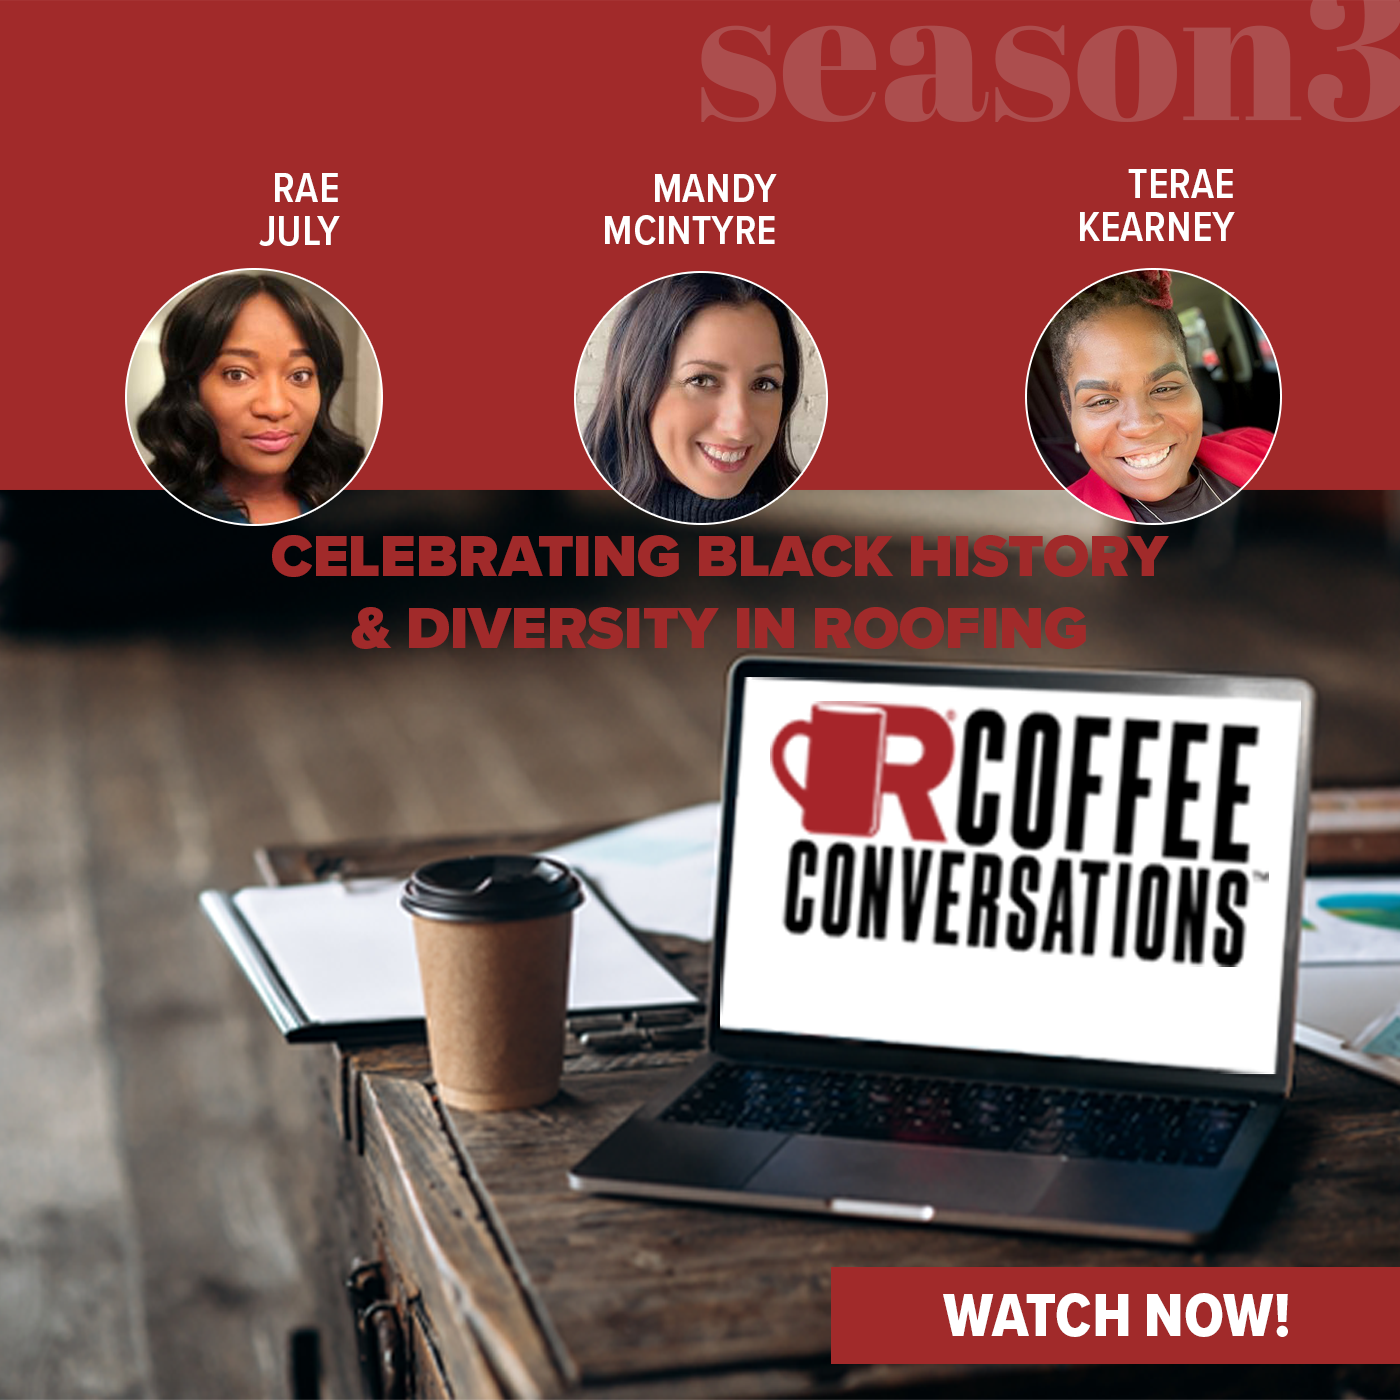 Coffee Conversations - Celebrating Black History & Diversity in Roofing